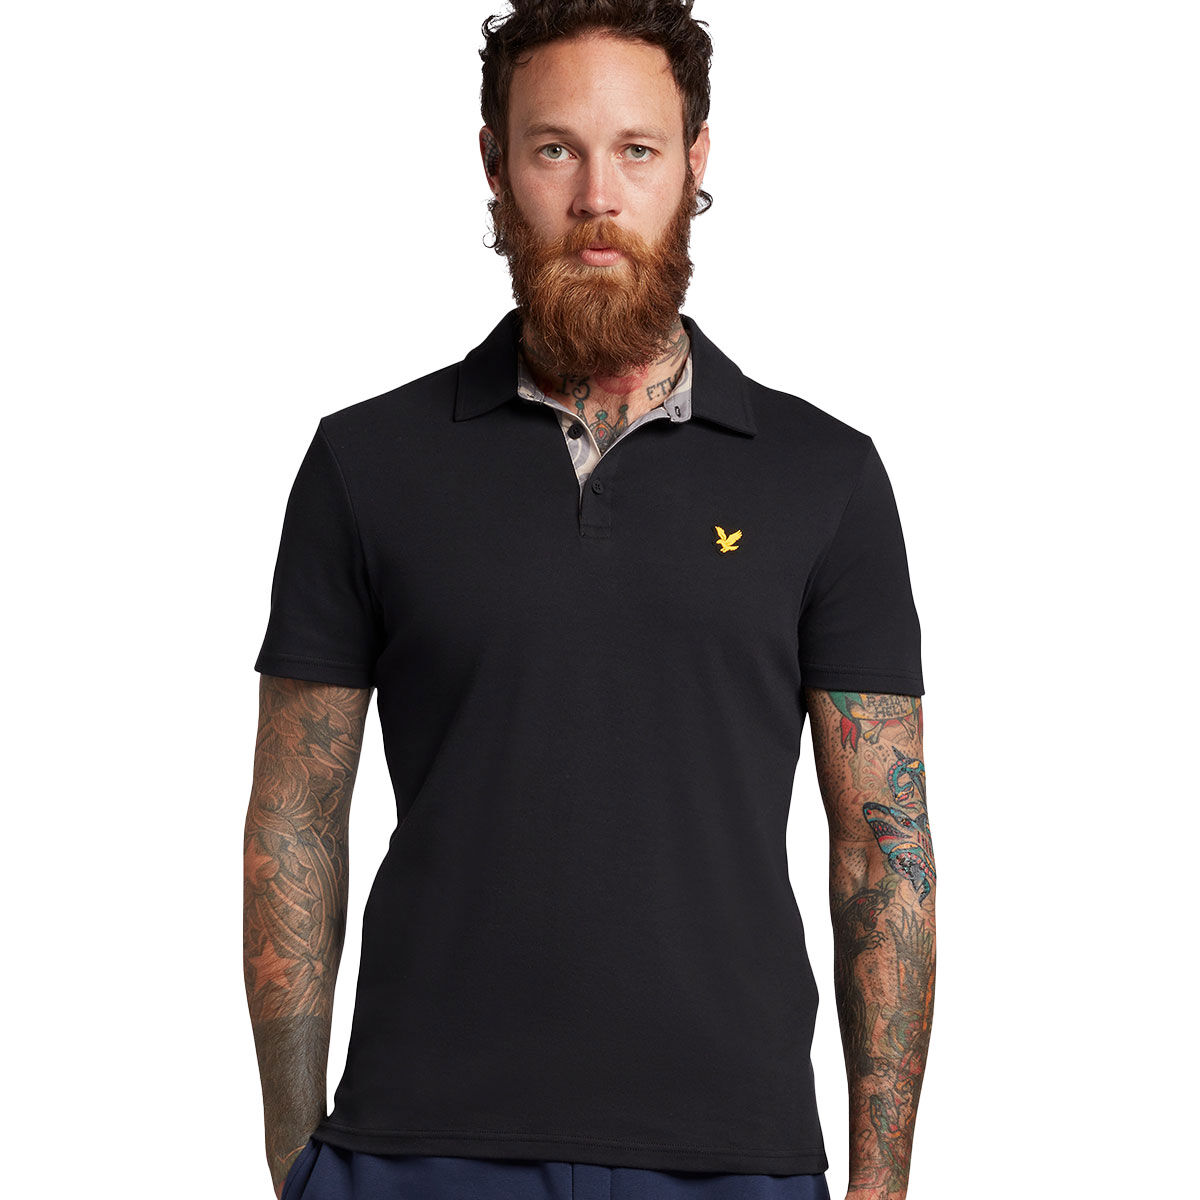 Lyle & Scott Jet Black Embroidered Contour Placket Breathable Golf Polo Shirt, Size: Small | American Golf